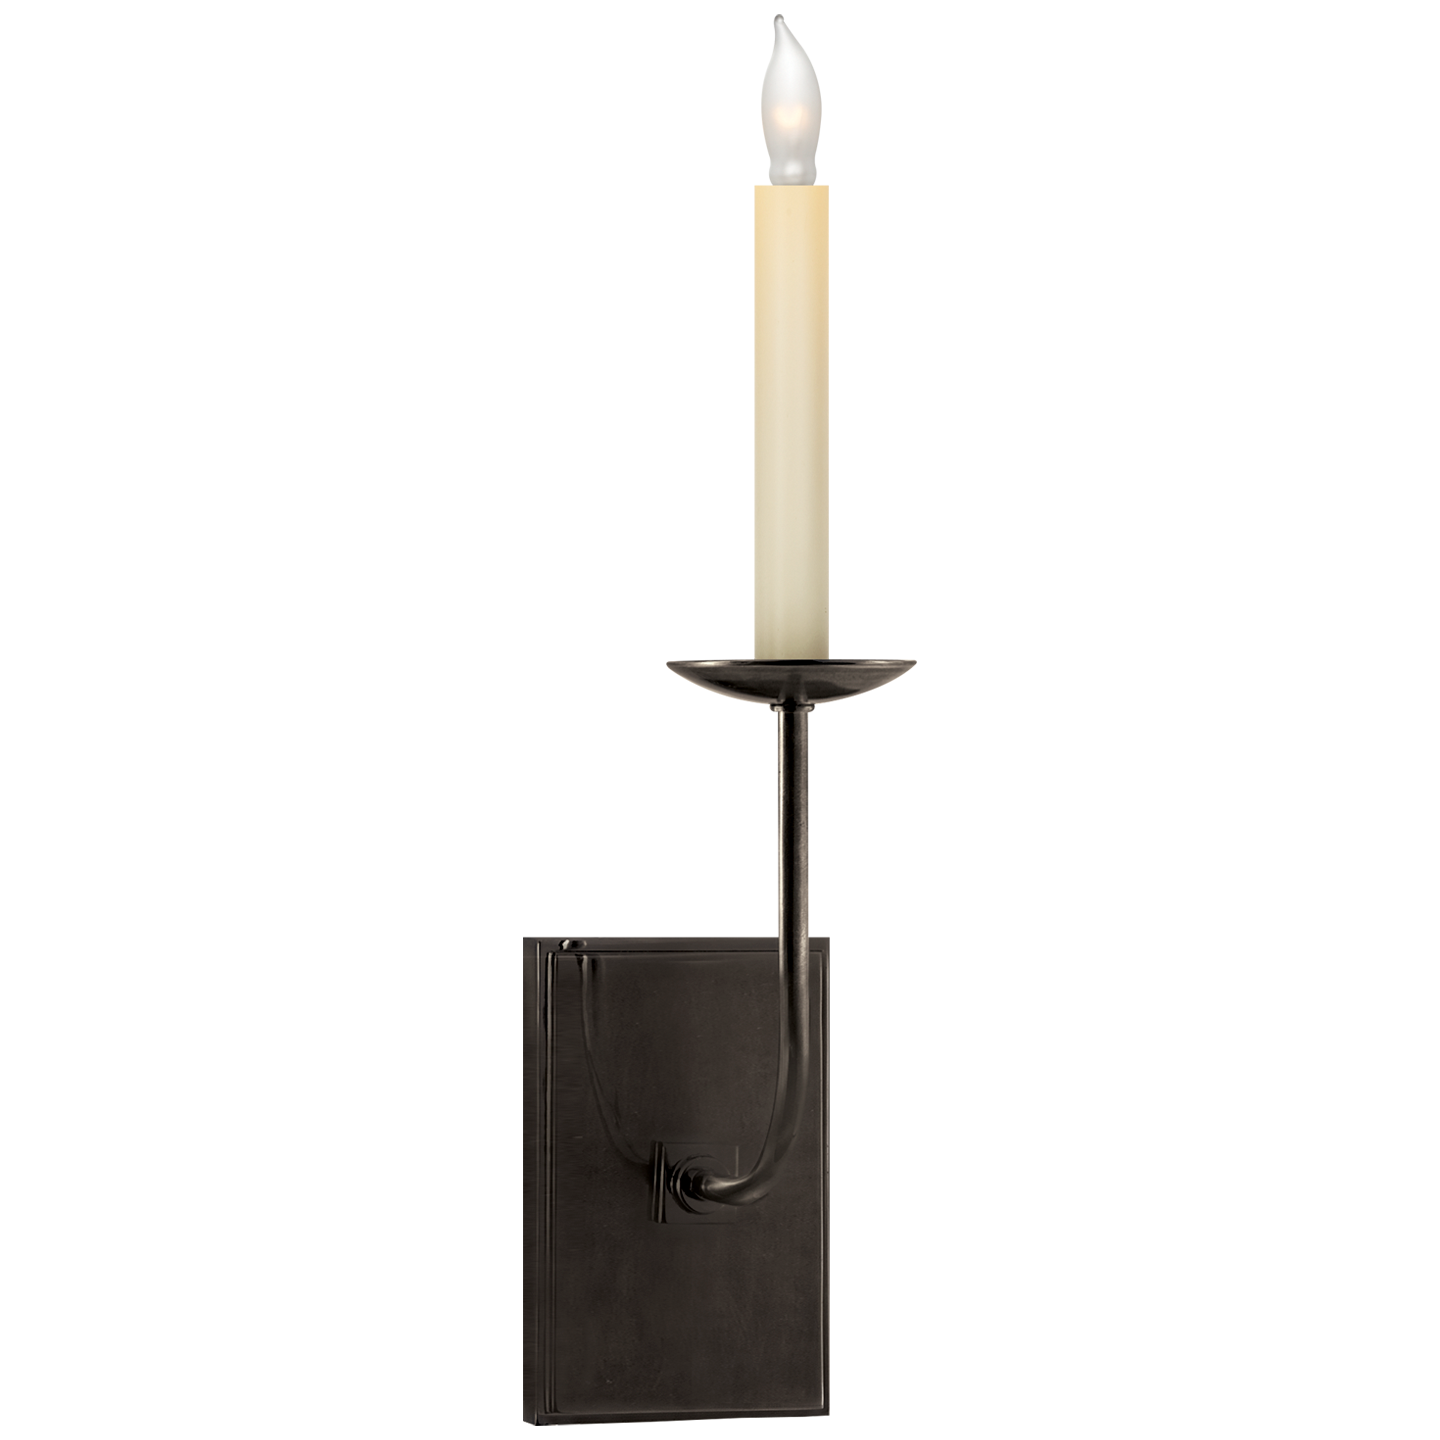 The TT Single Sconce by Visual Comfort is sleek and timeless, bringing a gorgeous source of light to any bathroom, hallway, or other area needing extra light  Designer: E. F. Chapman